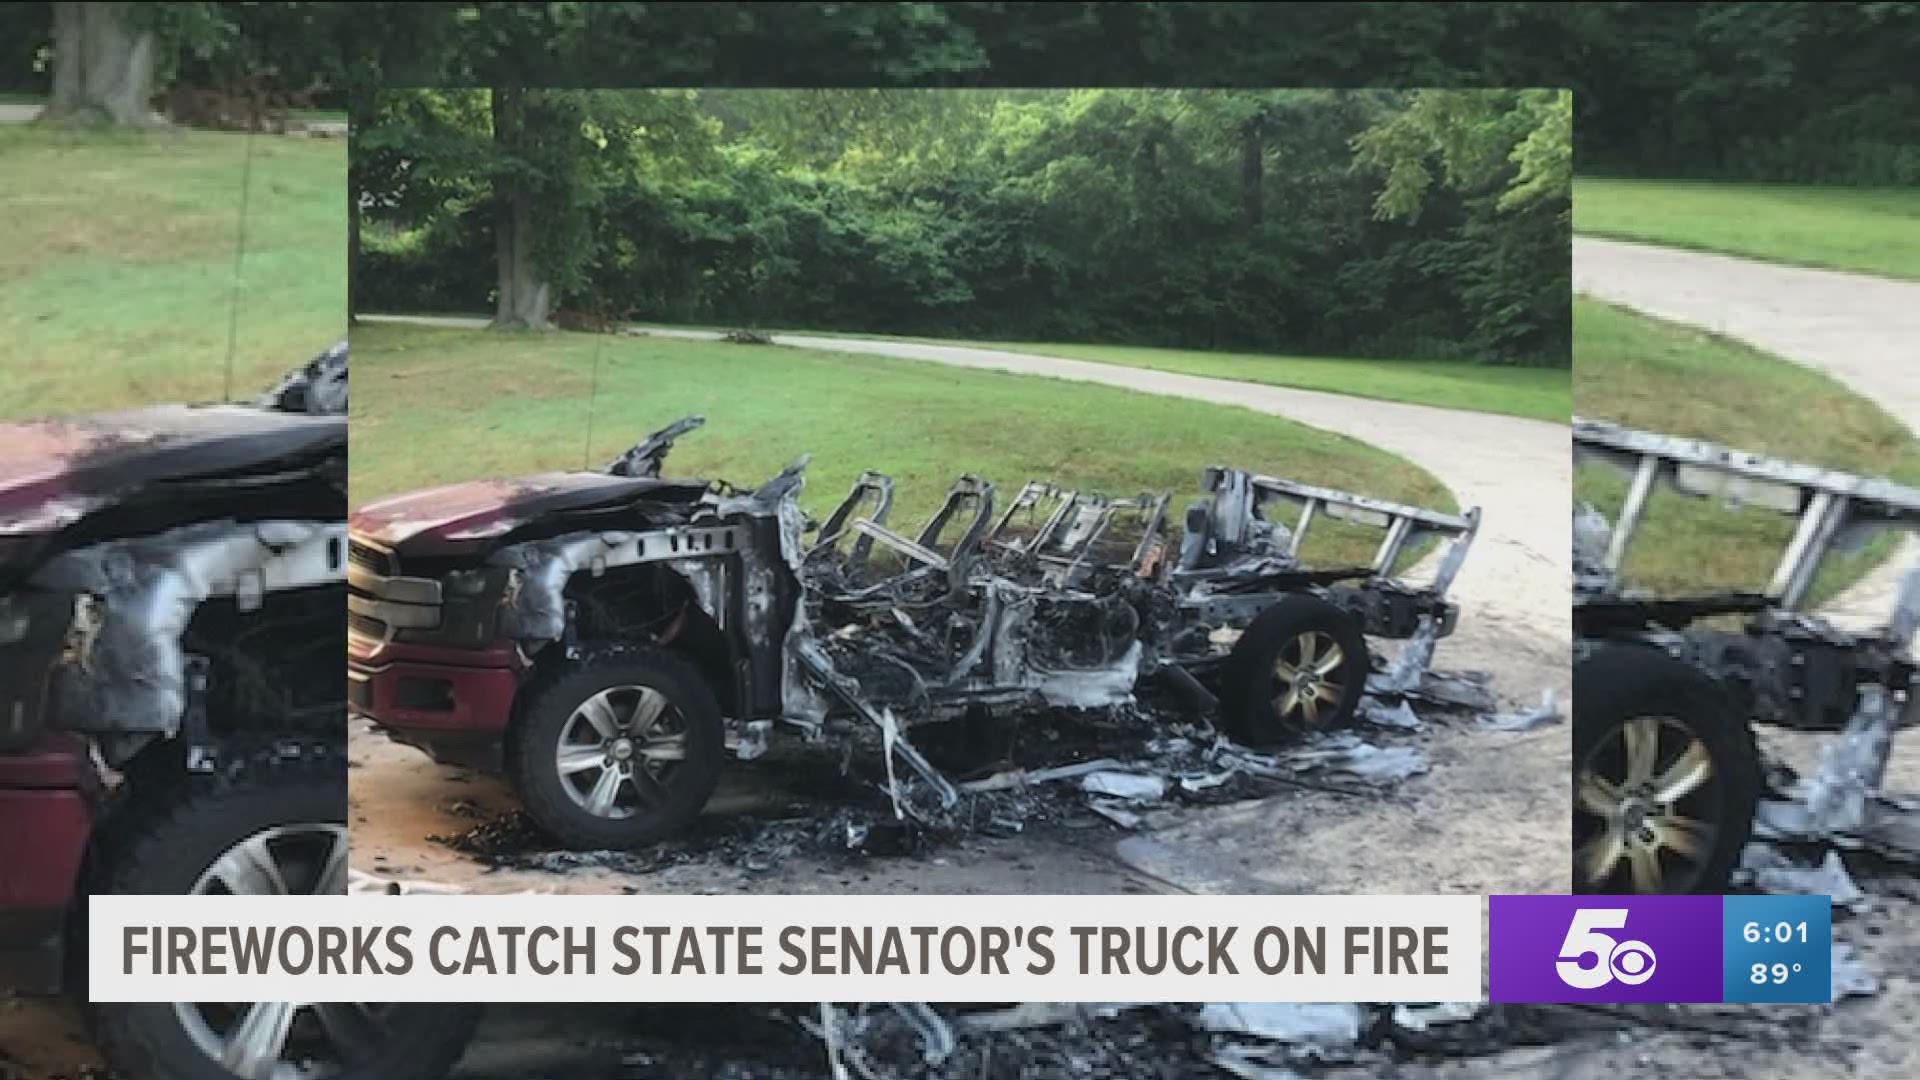 Sen. Jim Hendren says he thought all of the fireworks were out when he put them in his truck, but the truck caught fire. https://bit.ly/31EU1bu